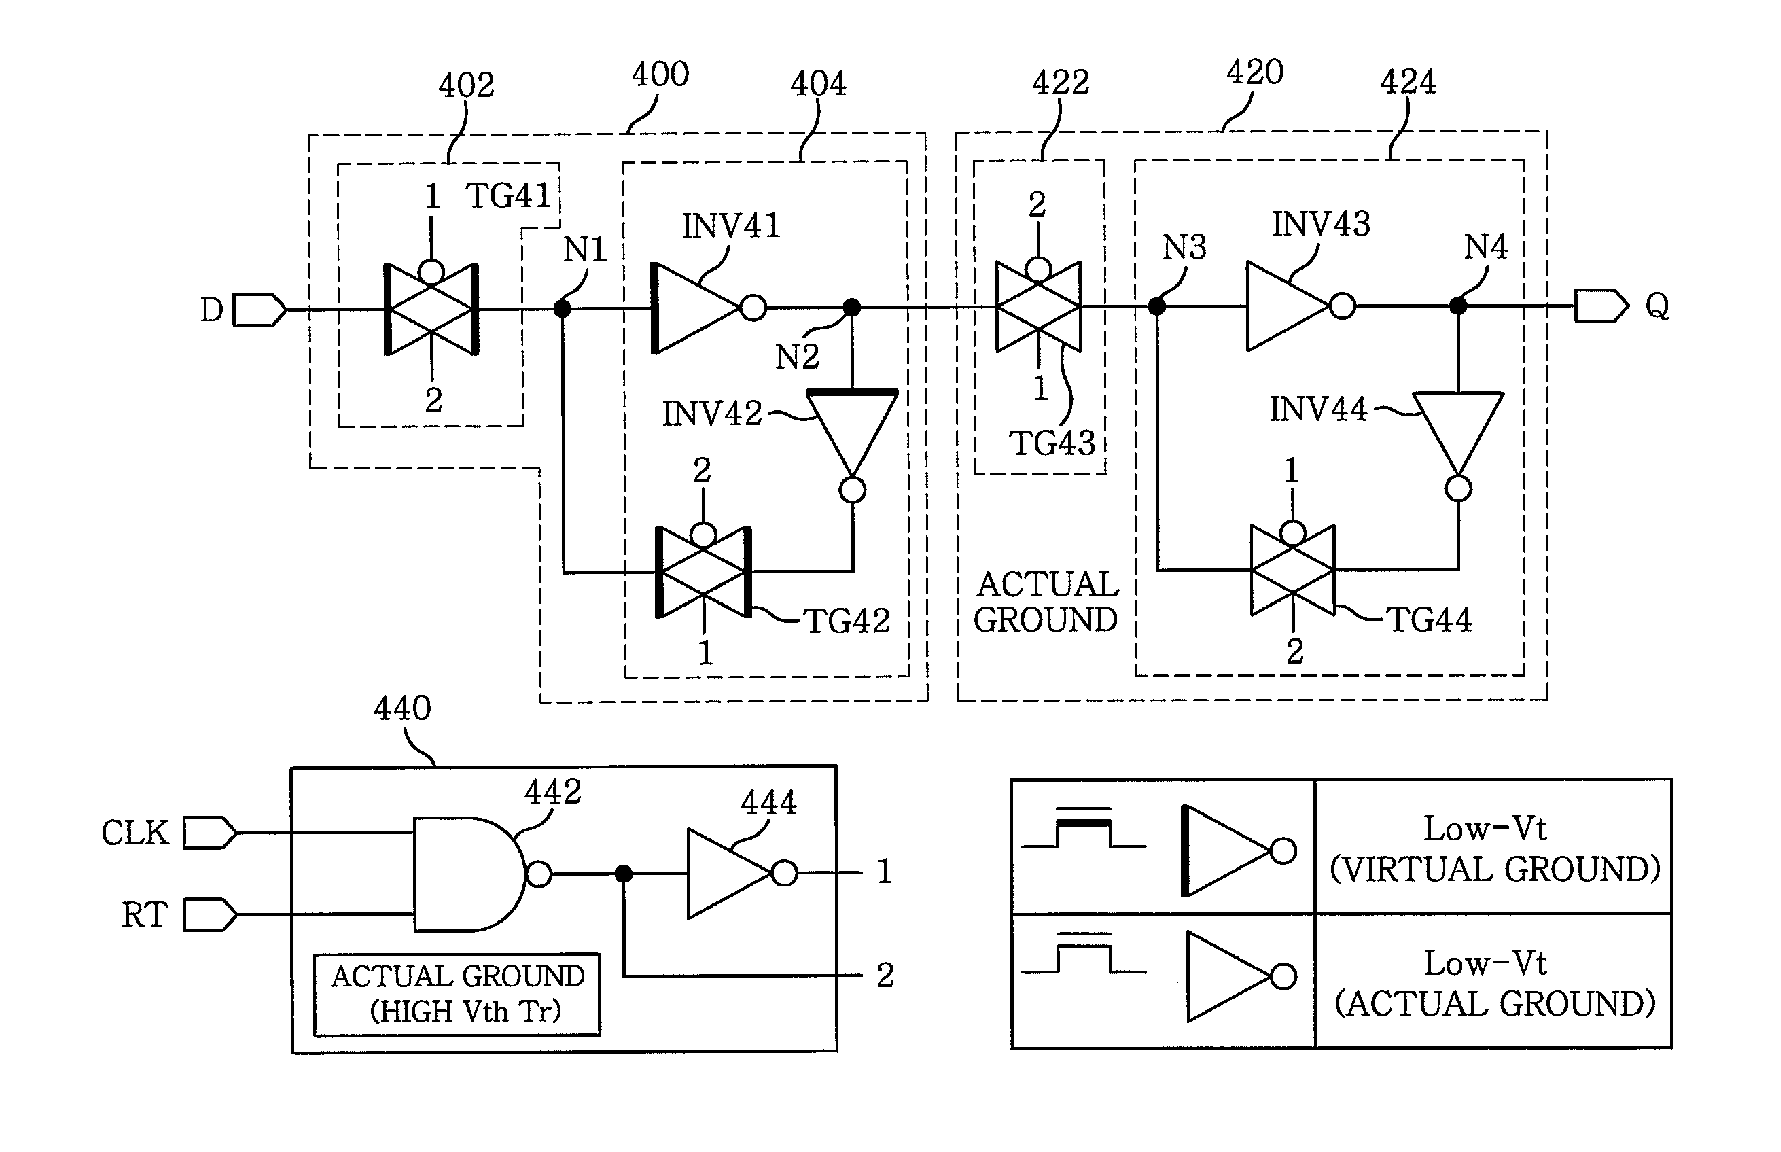 Mtcmos flip-flop with retention function